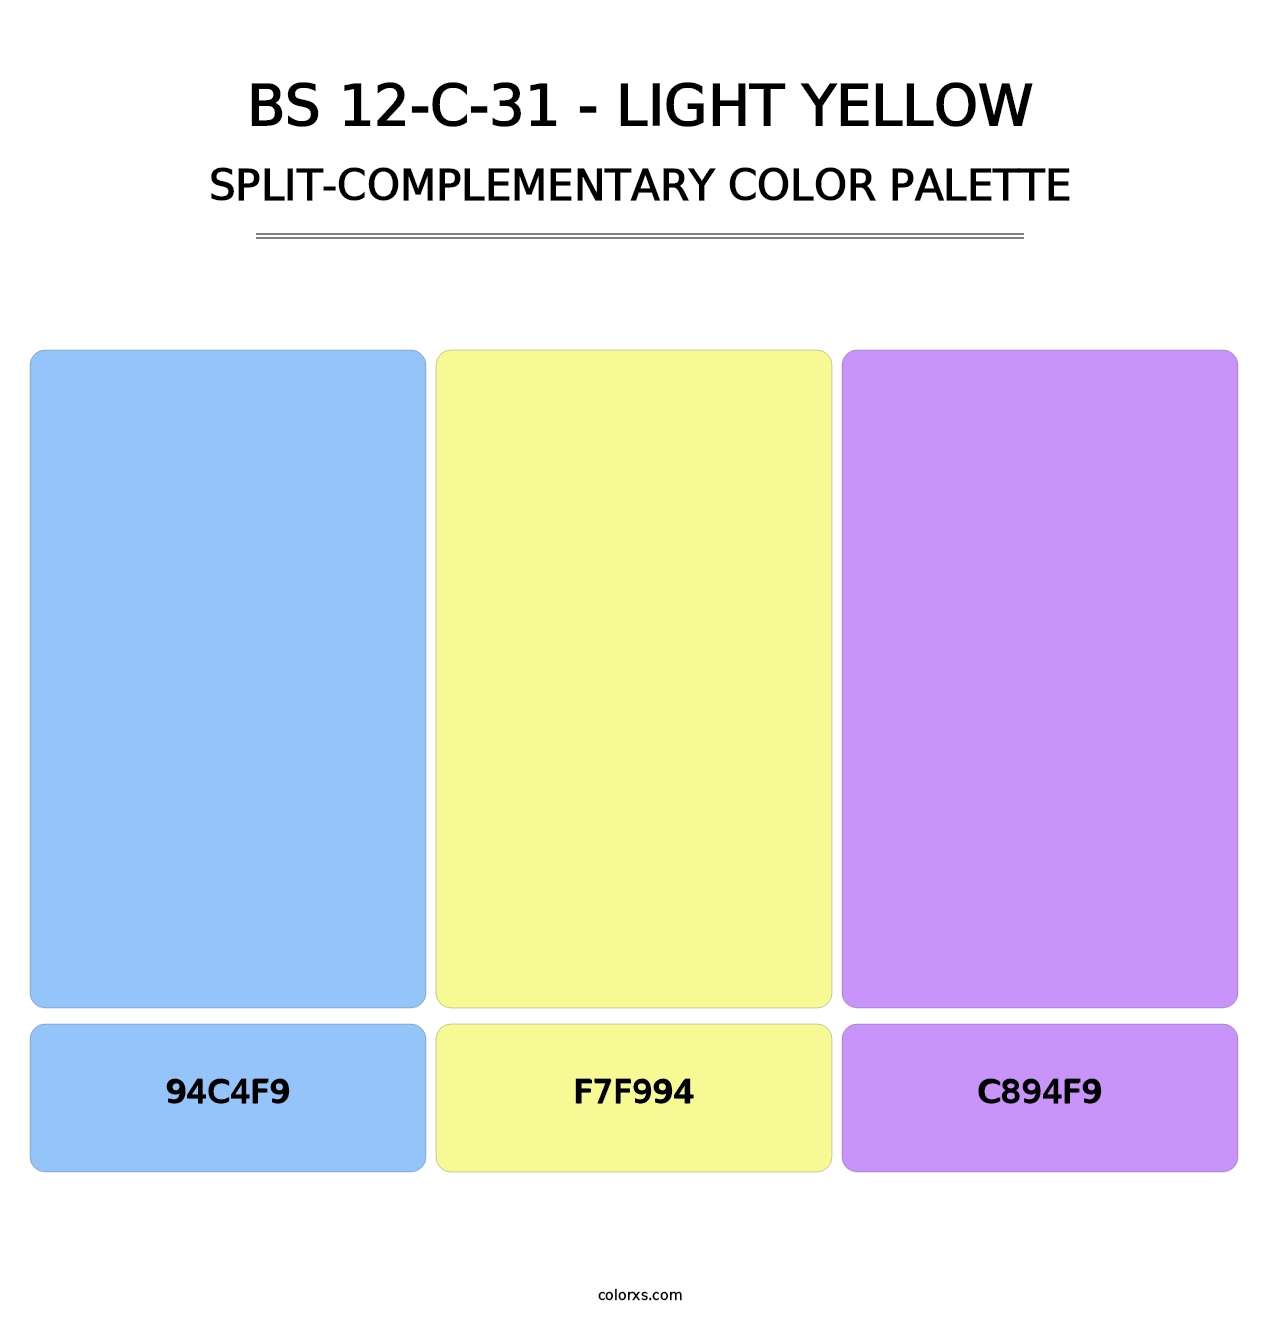 BS 12-C-31 - Light Yellow - Split-Complementary Color Palette